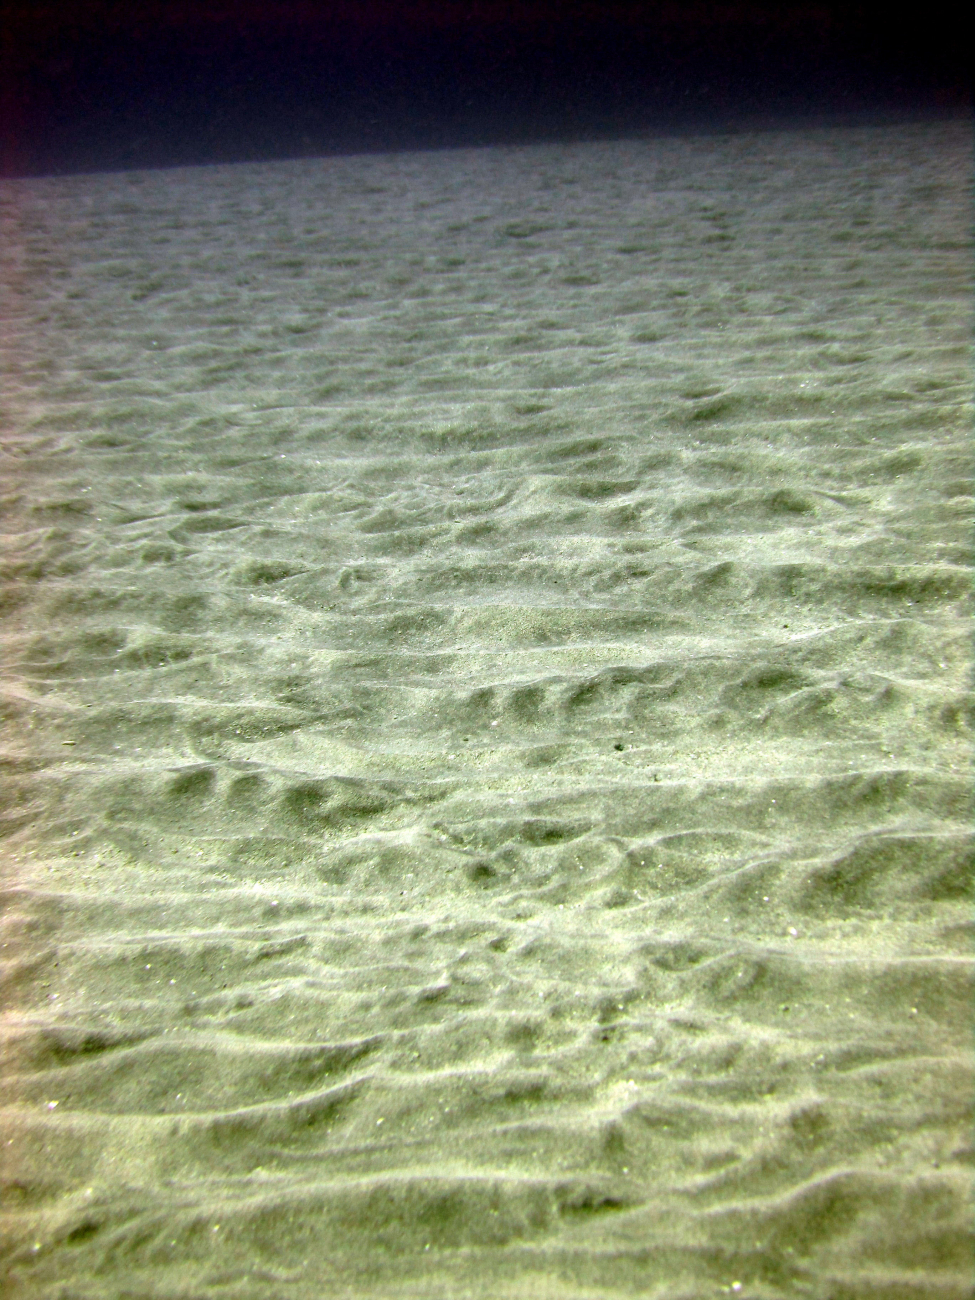 A well-rippled sandy bottom in an area of strong currents